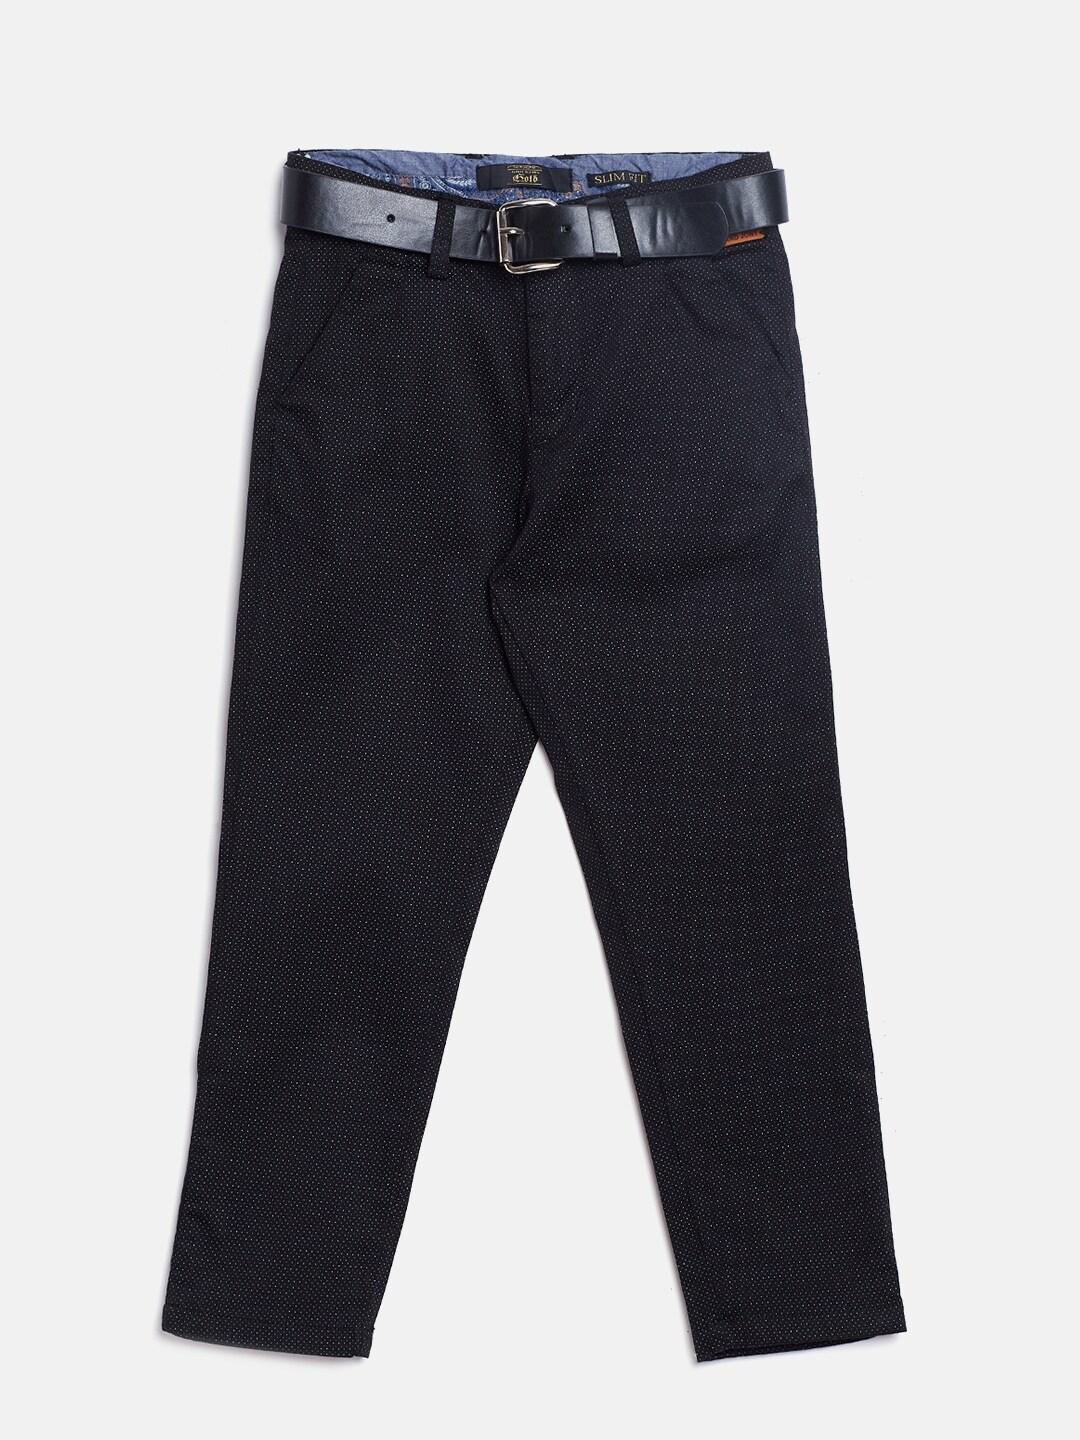 gini and jony boys black & white regular fit printed chinos with belt